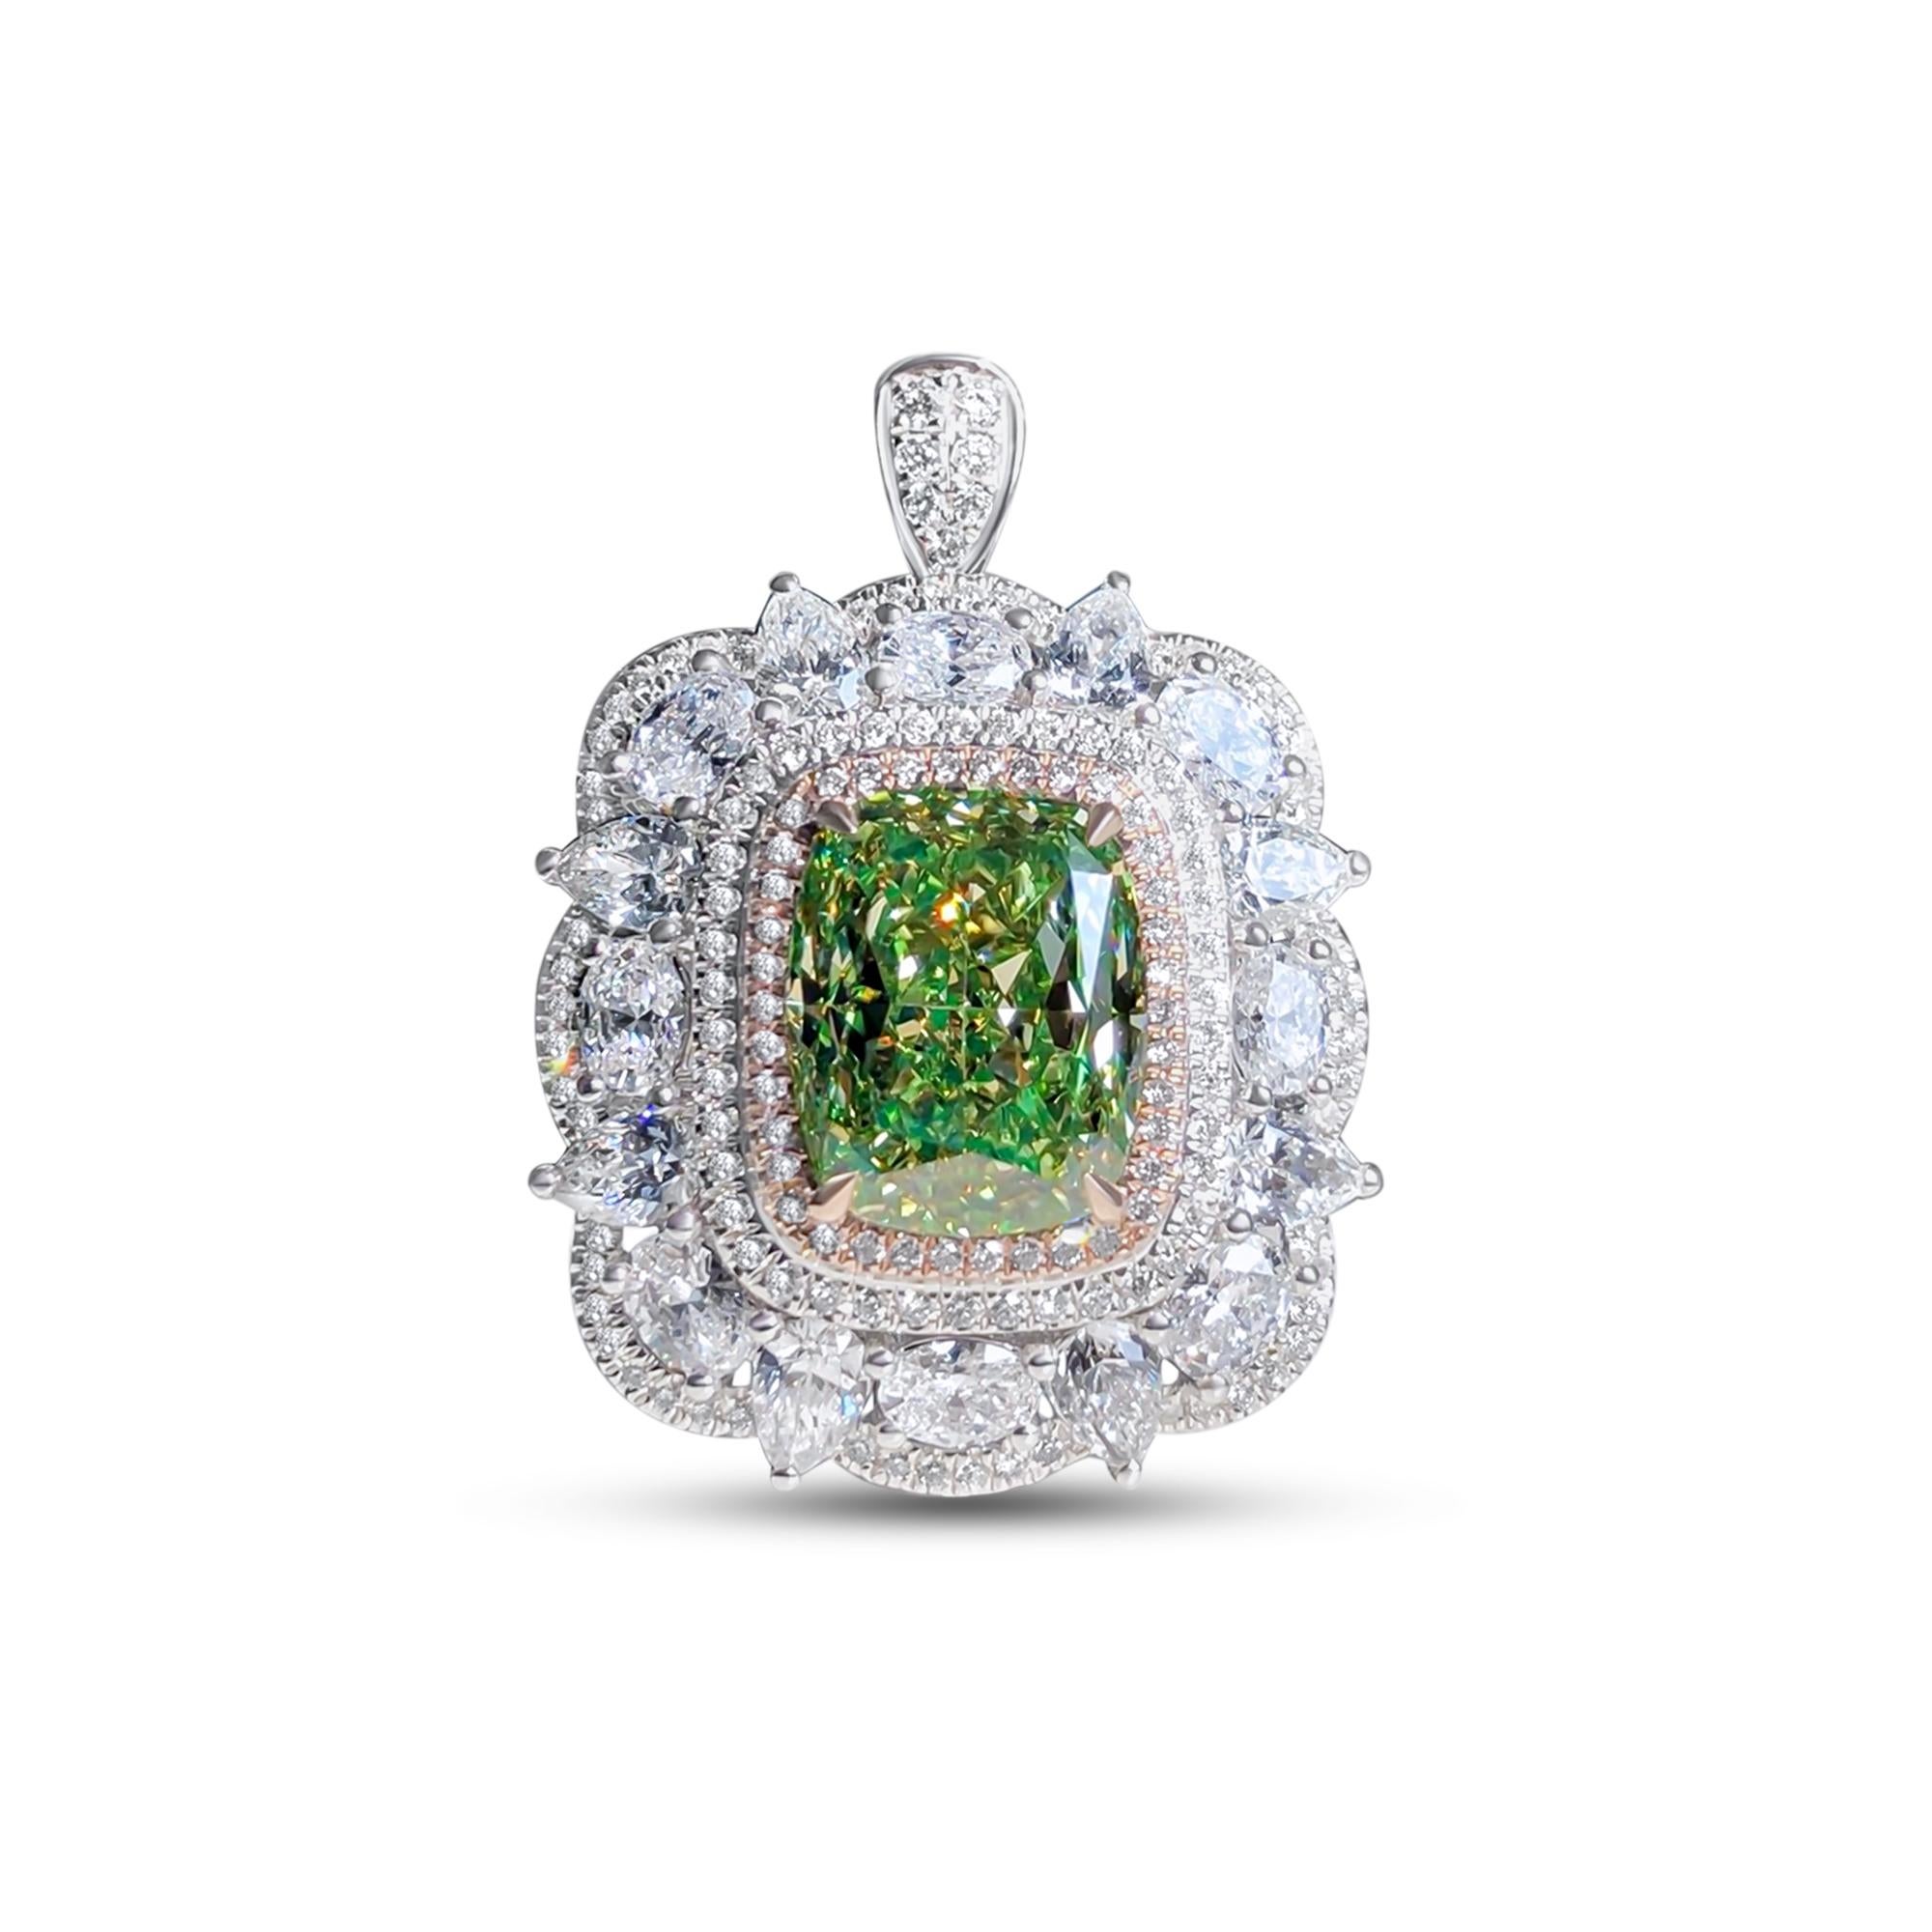 We invite you to discover this unique ring set with a GIA certified cushion cut green diamond of 5.01 carats enhanced with a double halo of colorless and pink diamonds embellished with multi cut diamonds totaling 3.018ct. 
Versatile, you can also